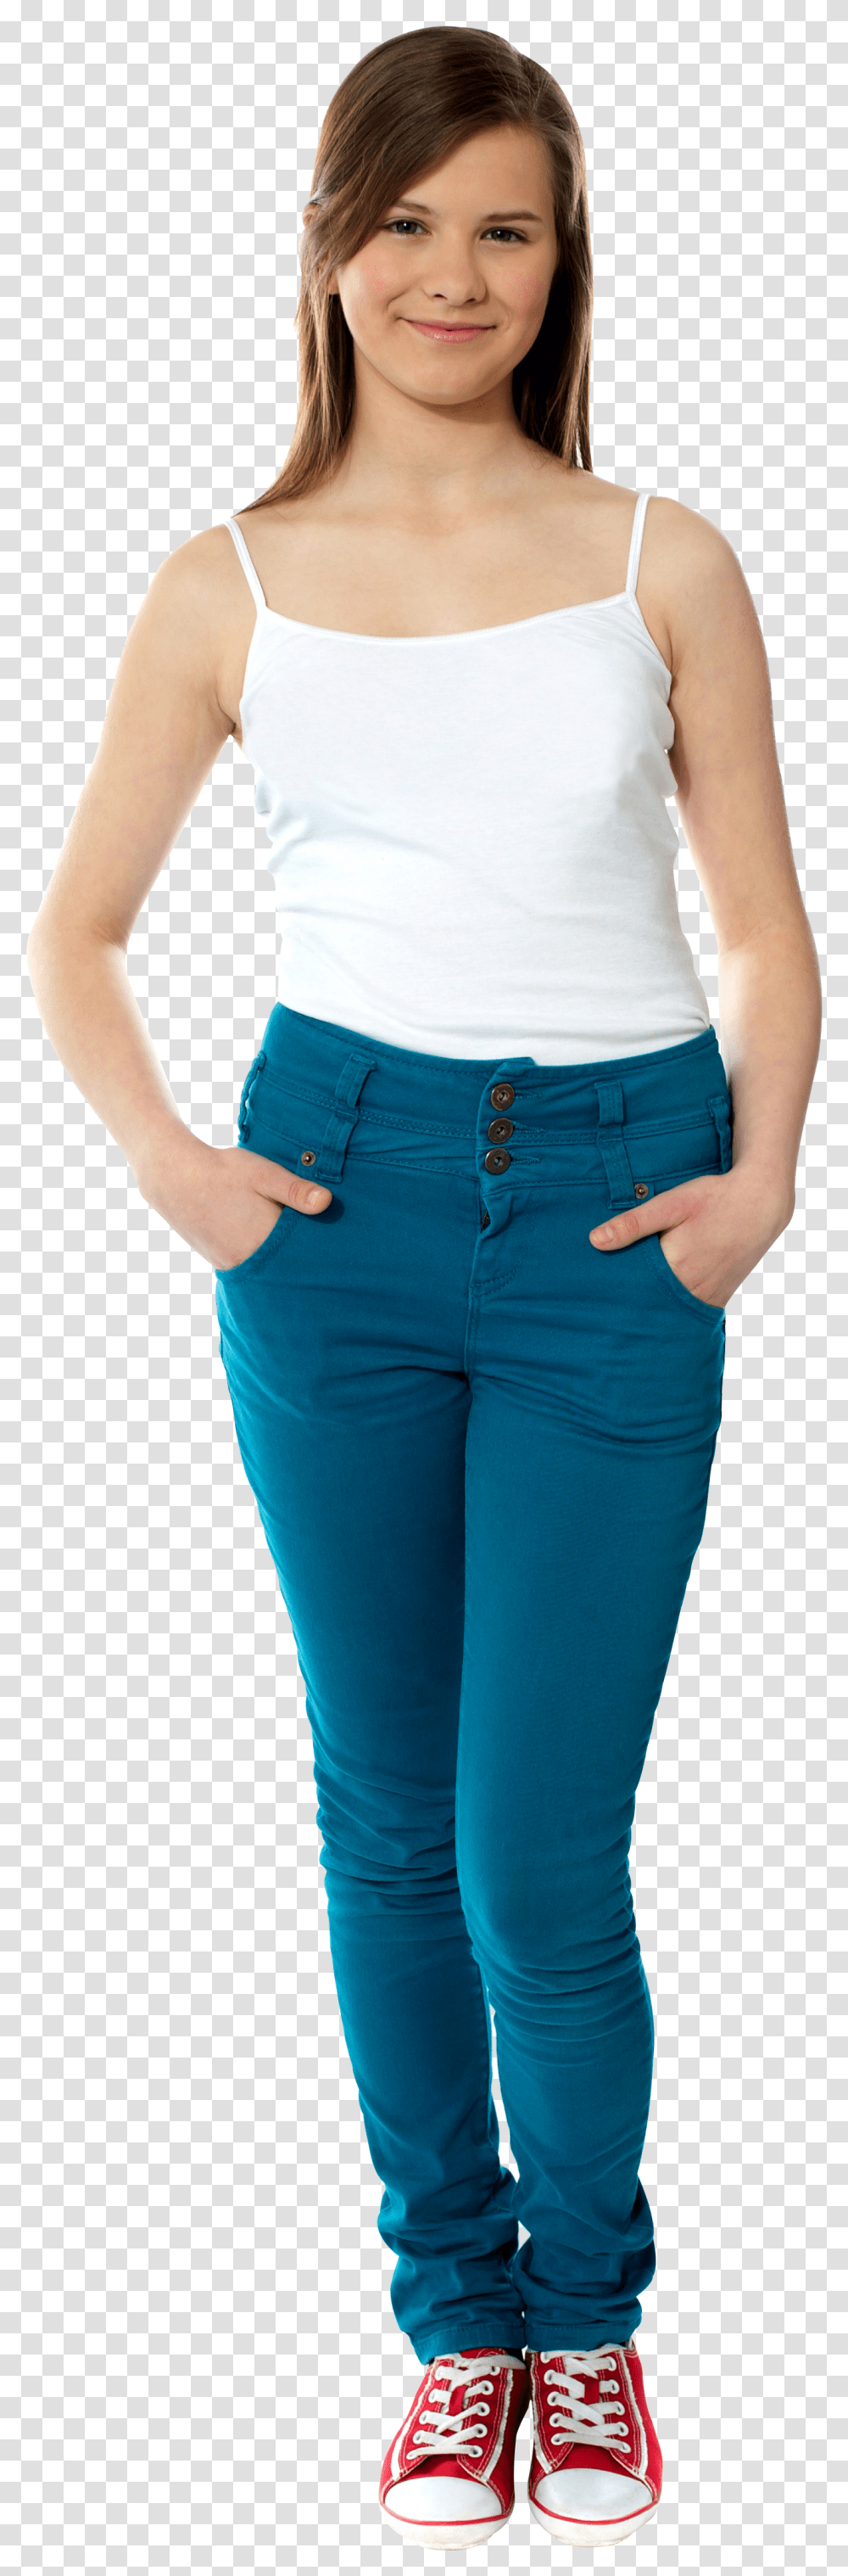 Woman Standing Standing Woman Transparent Png